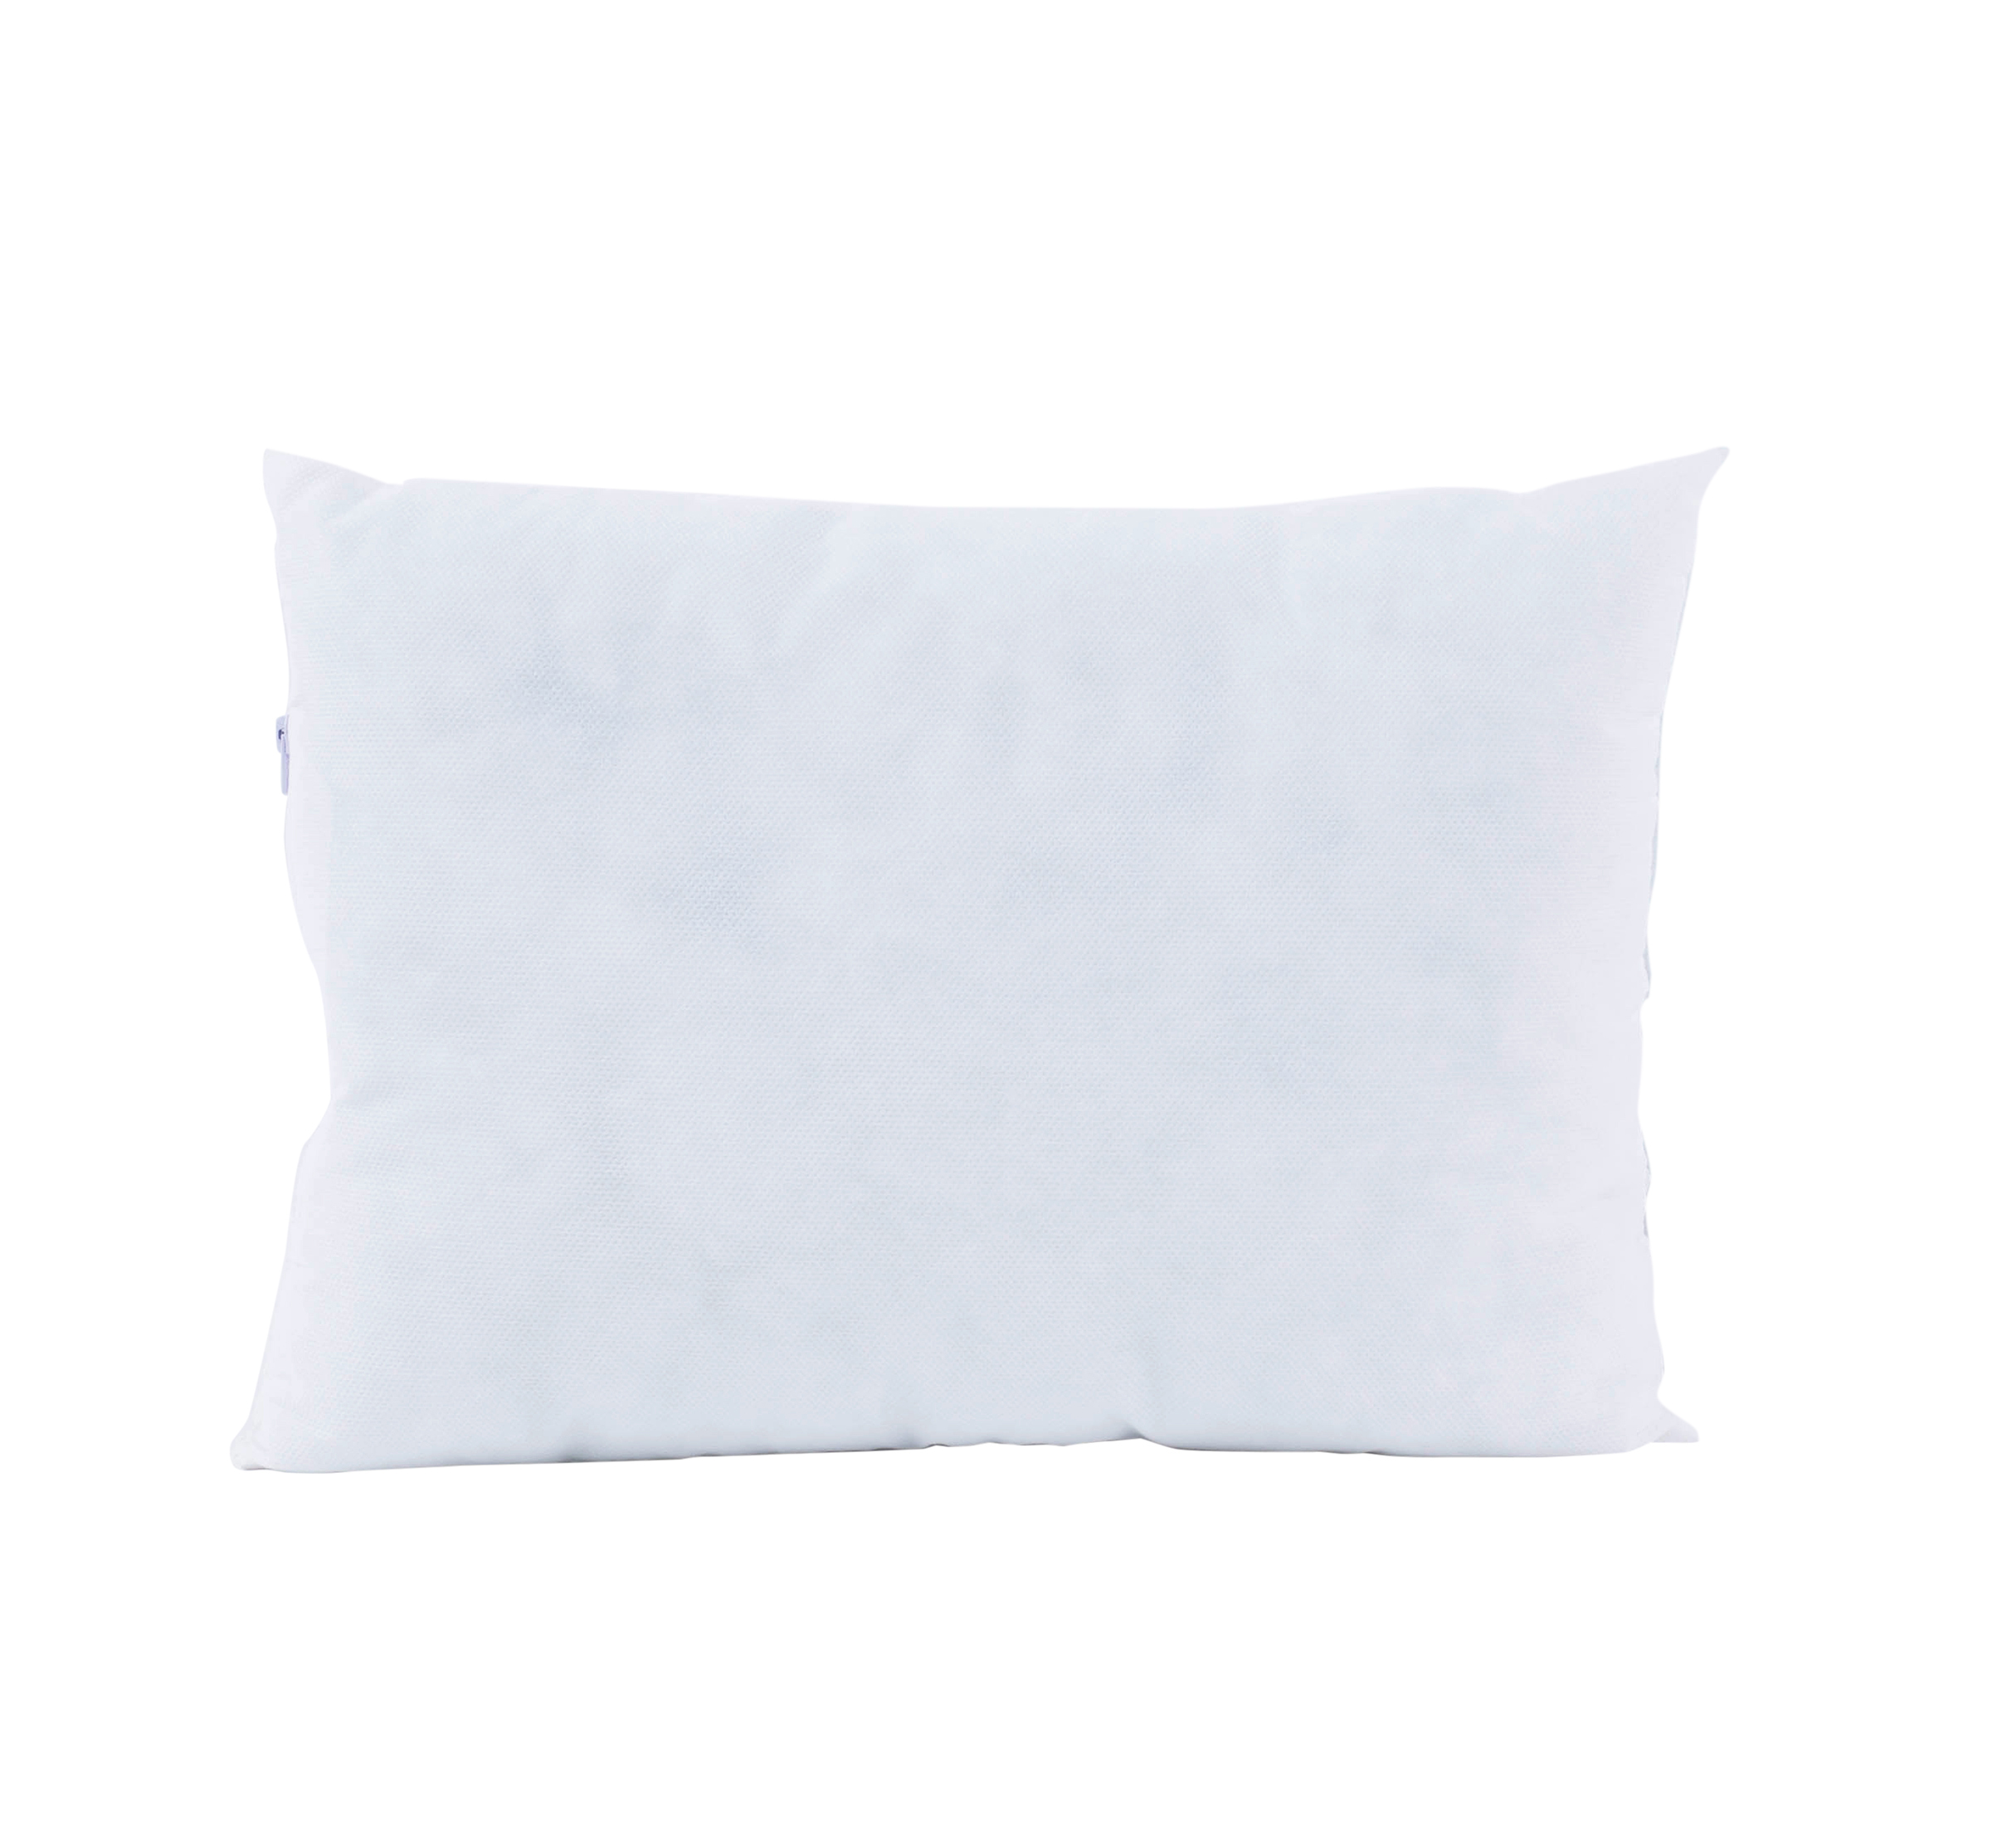 Poly-Fil® Crafter's Choice® Rectangular Pillow Insert by Fairfield™, 12" x 16" - image 3 of 5